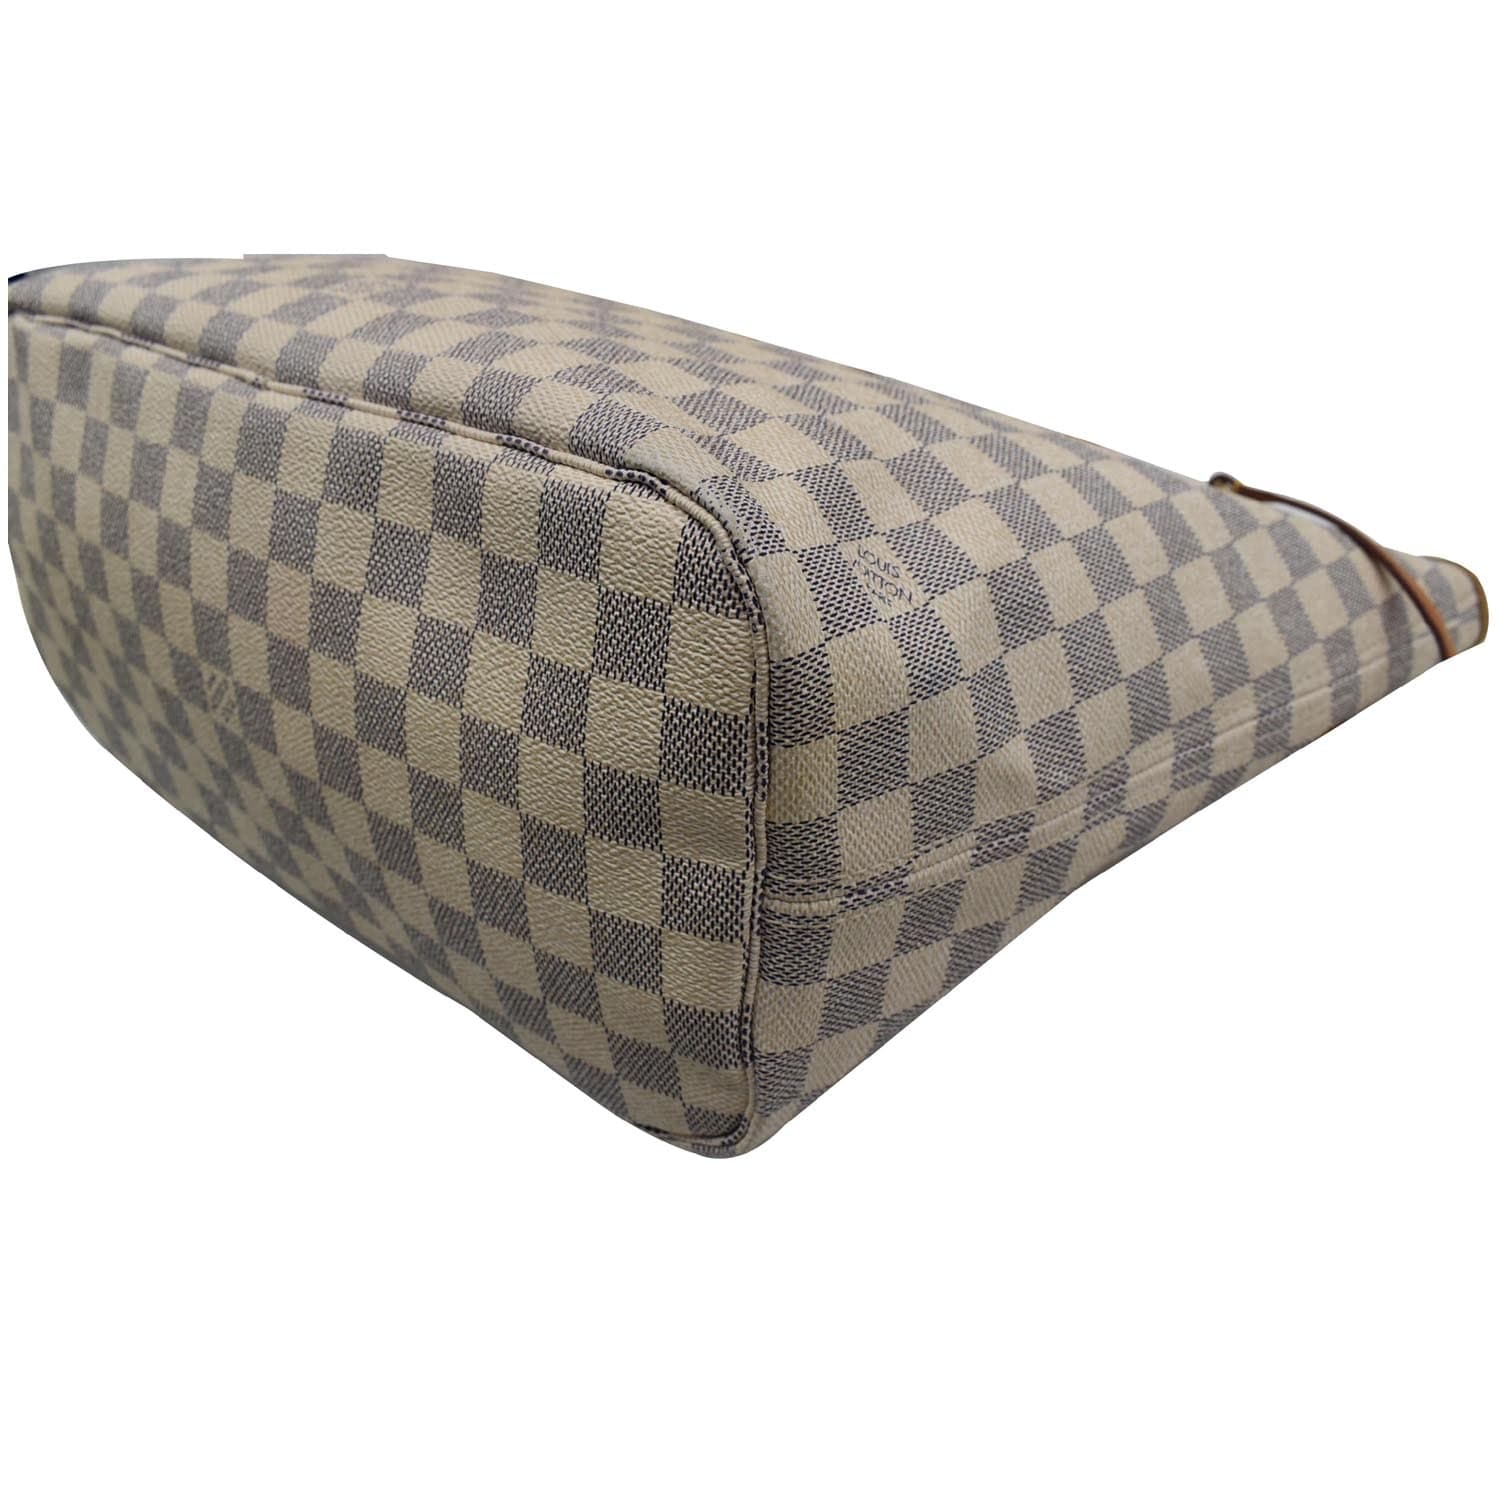 Louis Vuitton Damier Azur Neverfull MM Tote - A World Of Goods For